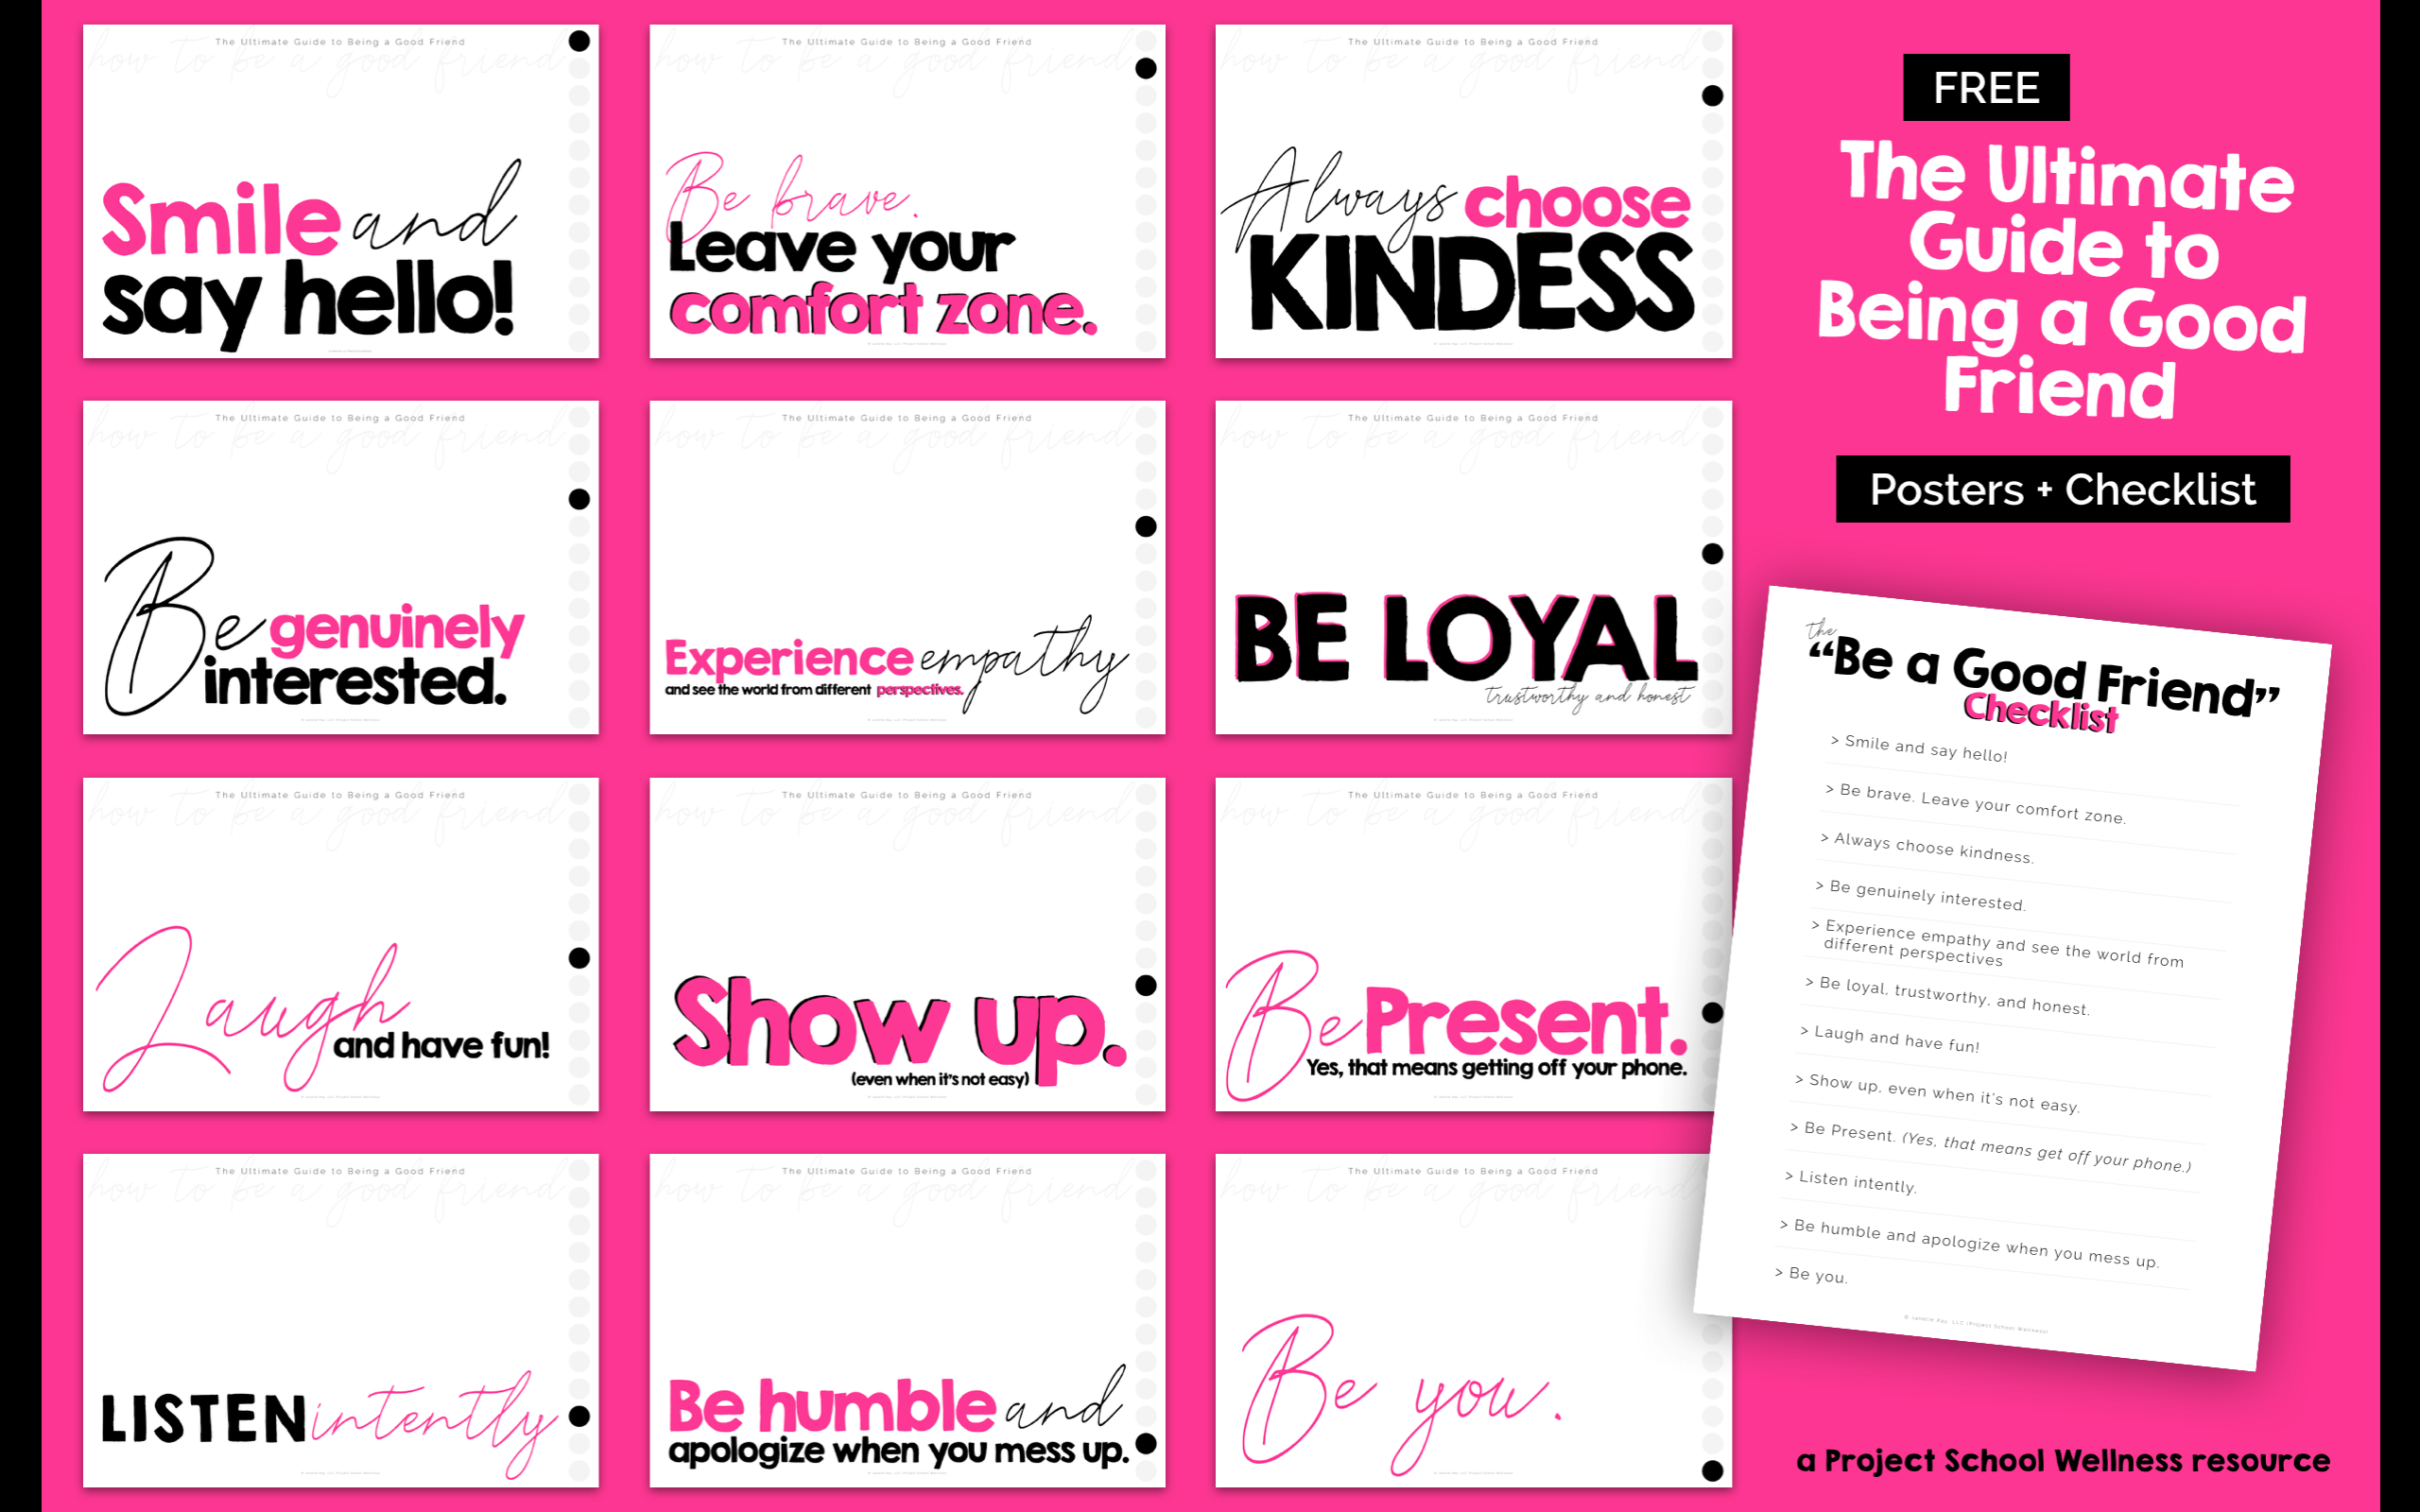 Free Classroom Posters - How to be A Good Friend. Use these posters in your classroom to promote being a good friend. Each poster features a social habits connected to being a good friend. These free classroom posters are perfect for any middle school classroom across the curriculum. Head over to Project School Wellness to download and print your posters.